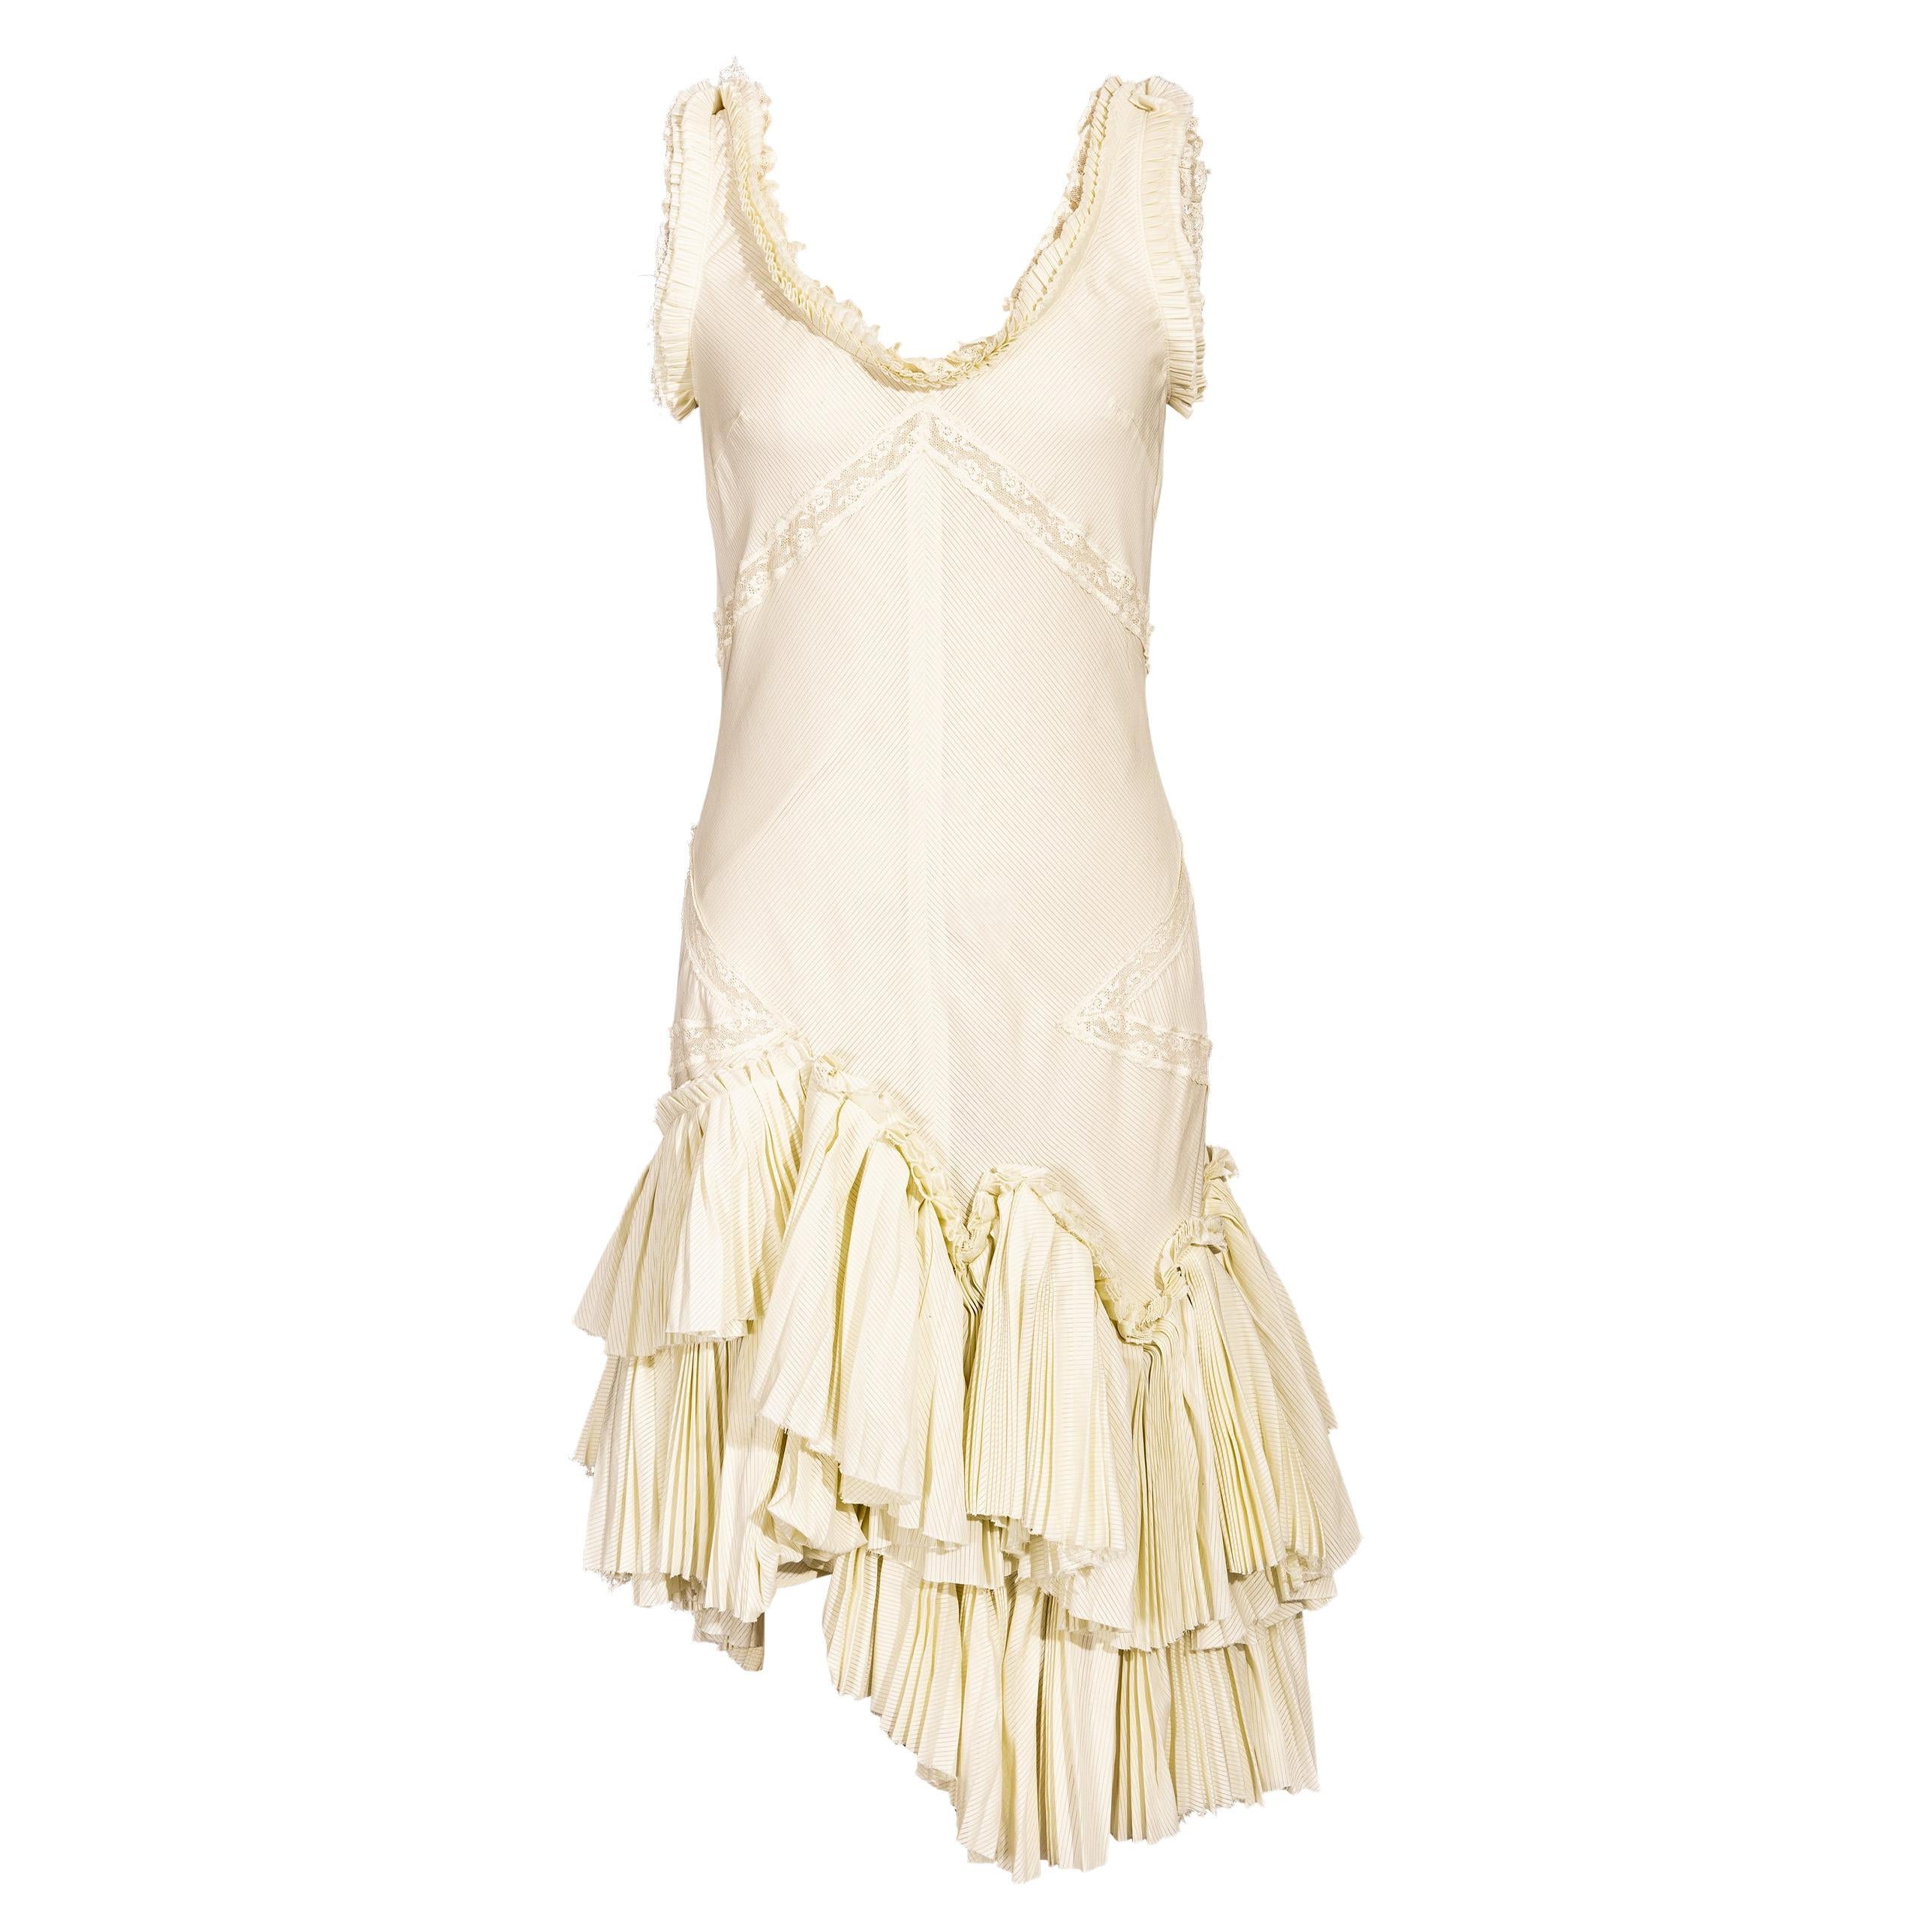 S/S 2005 Alexander McQueen (Lifetime) Pale Yellow Pleated and Lace Cotton Dress For Sale